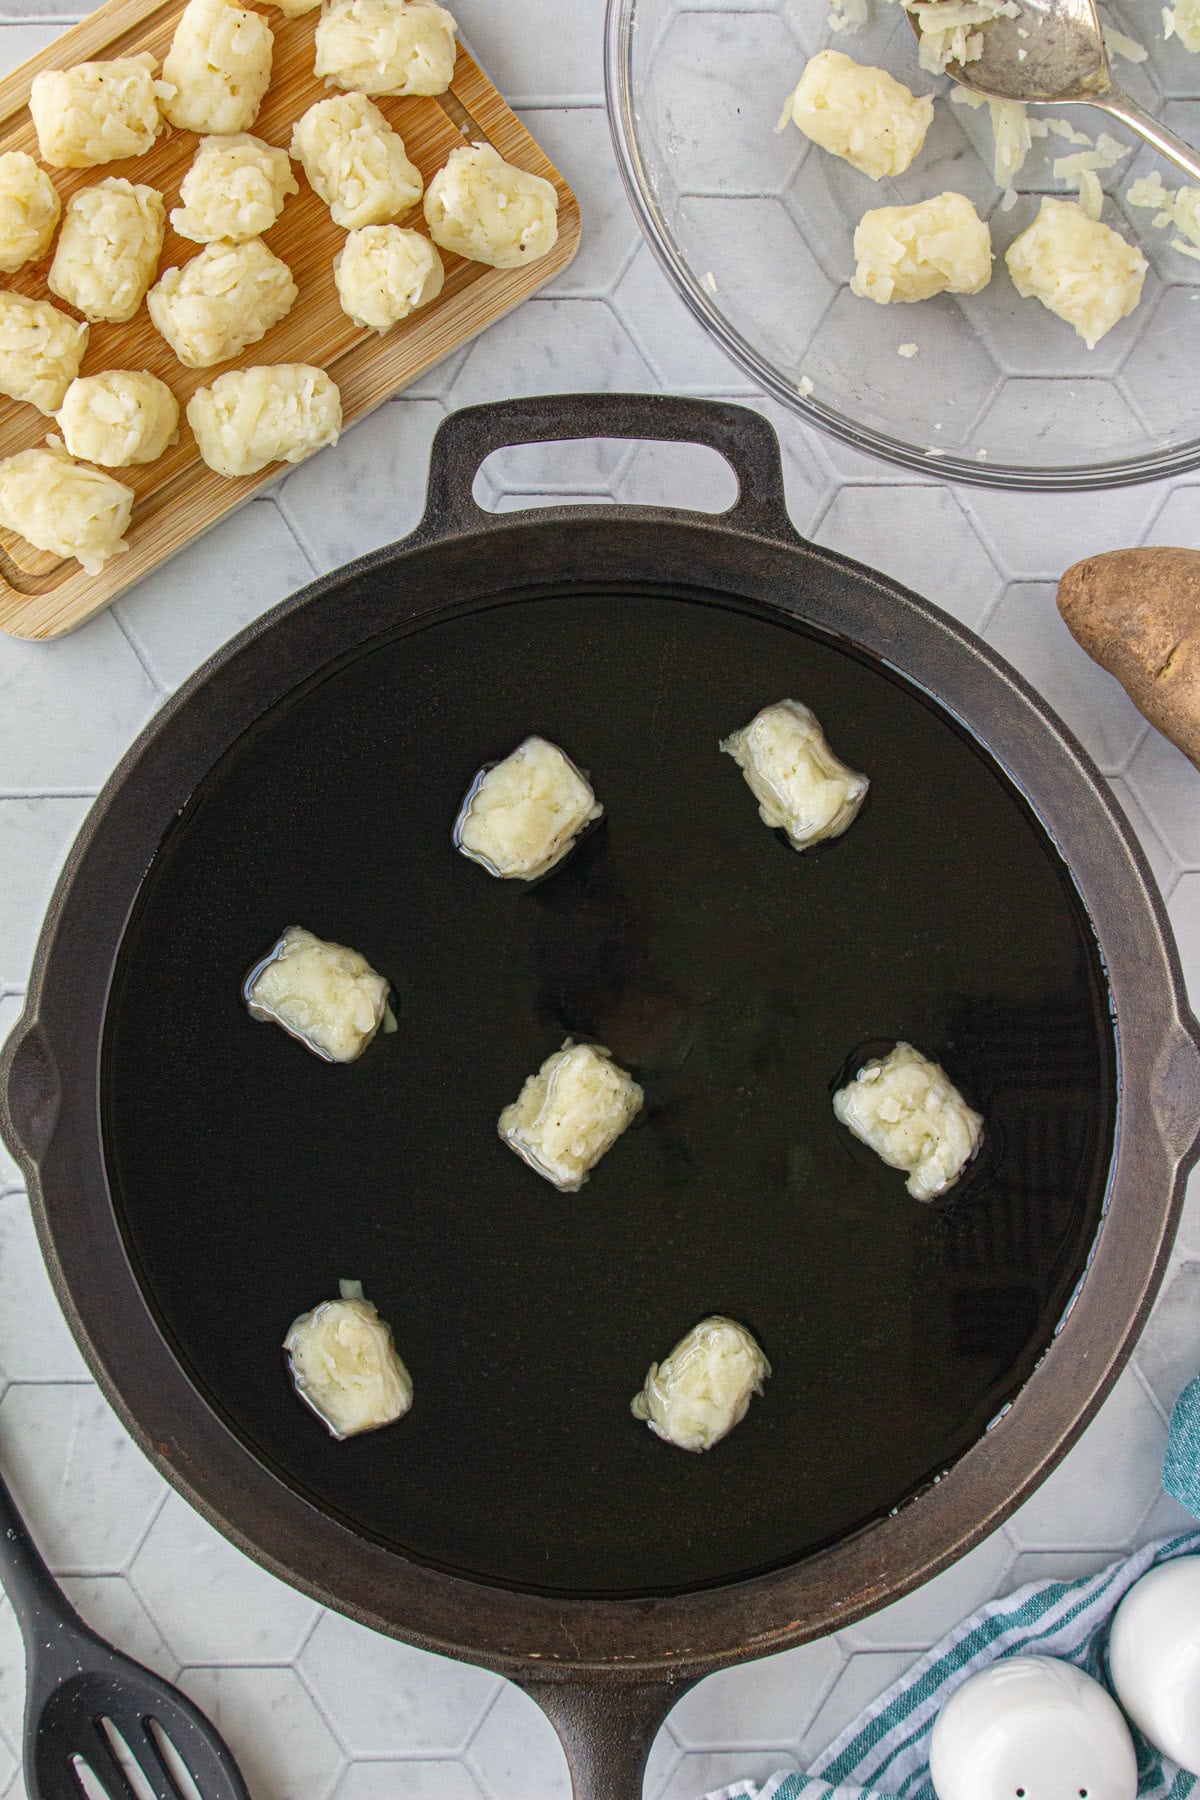 Homemade tater tots cooking in a pan.